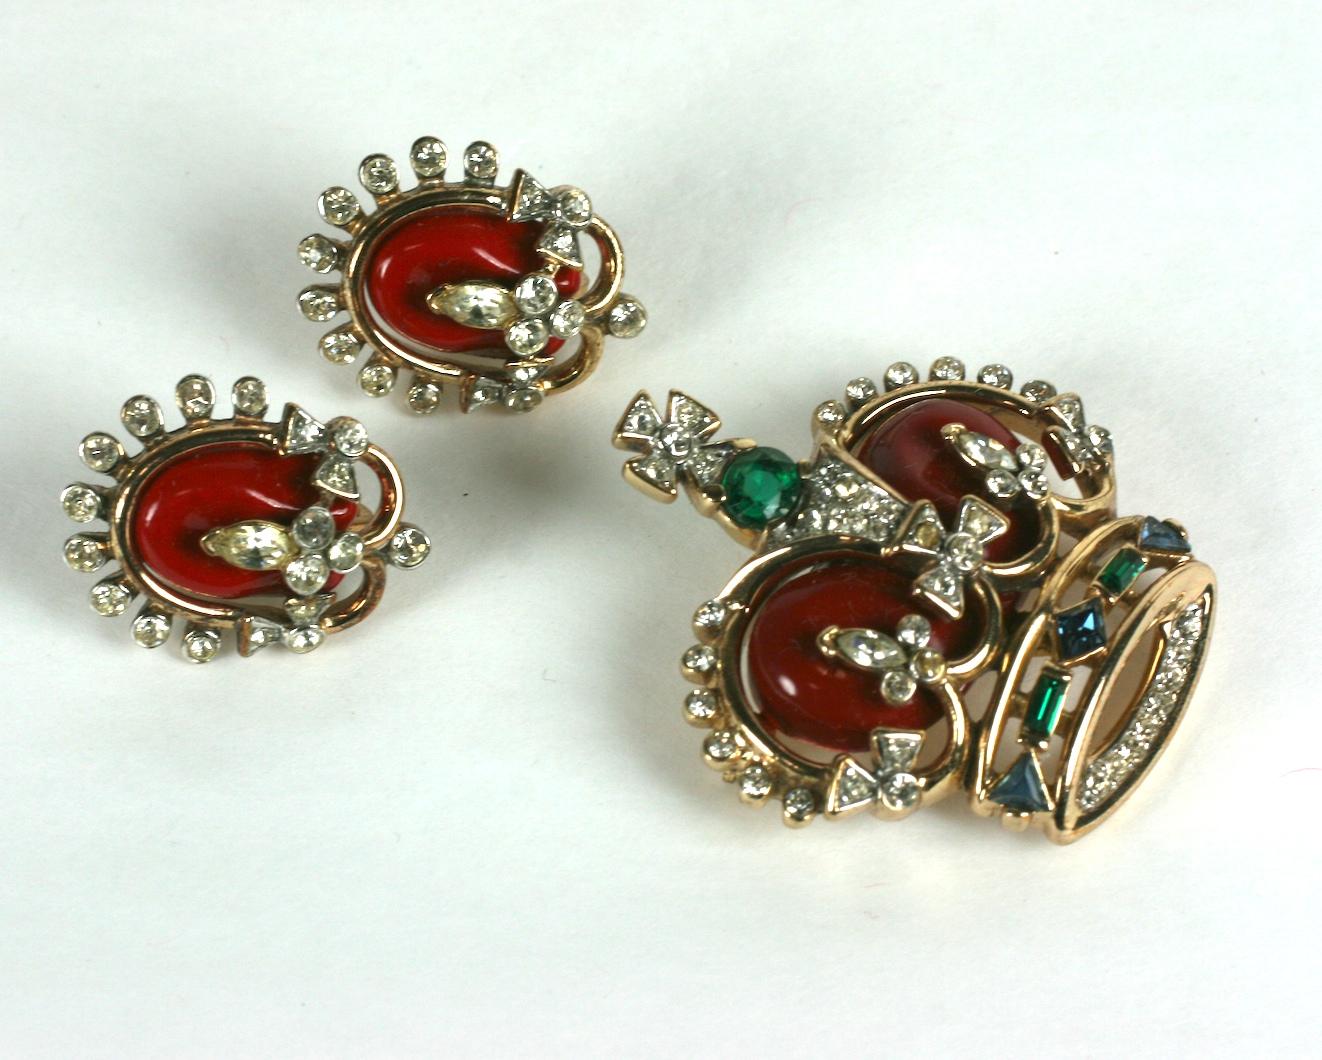 Trifari Alfred Philippe Coronation Gems Red Royal Crown  brooch and matching earclips in the original presentation box.
Gold and rhodium plate base metal, crystal, emerald, sapphire rhinestones with and cold enameling.
Condition: Excellent  Marked